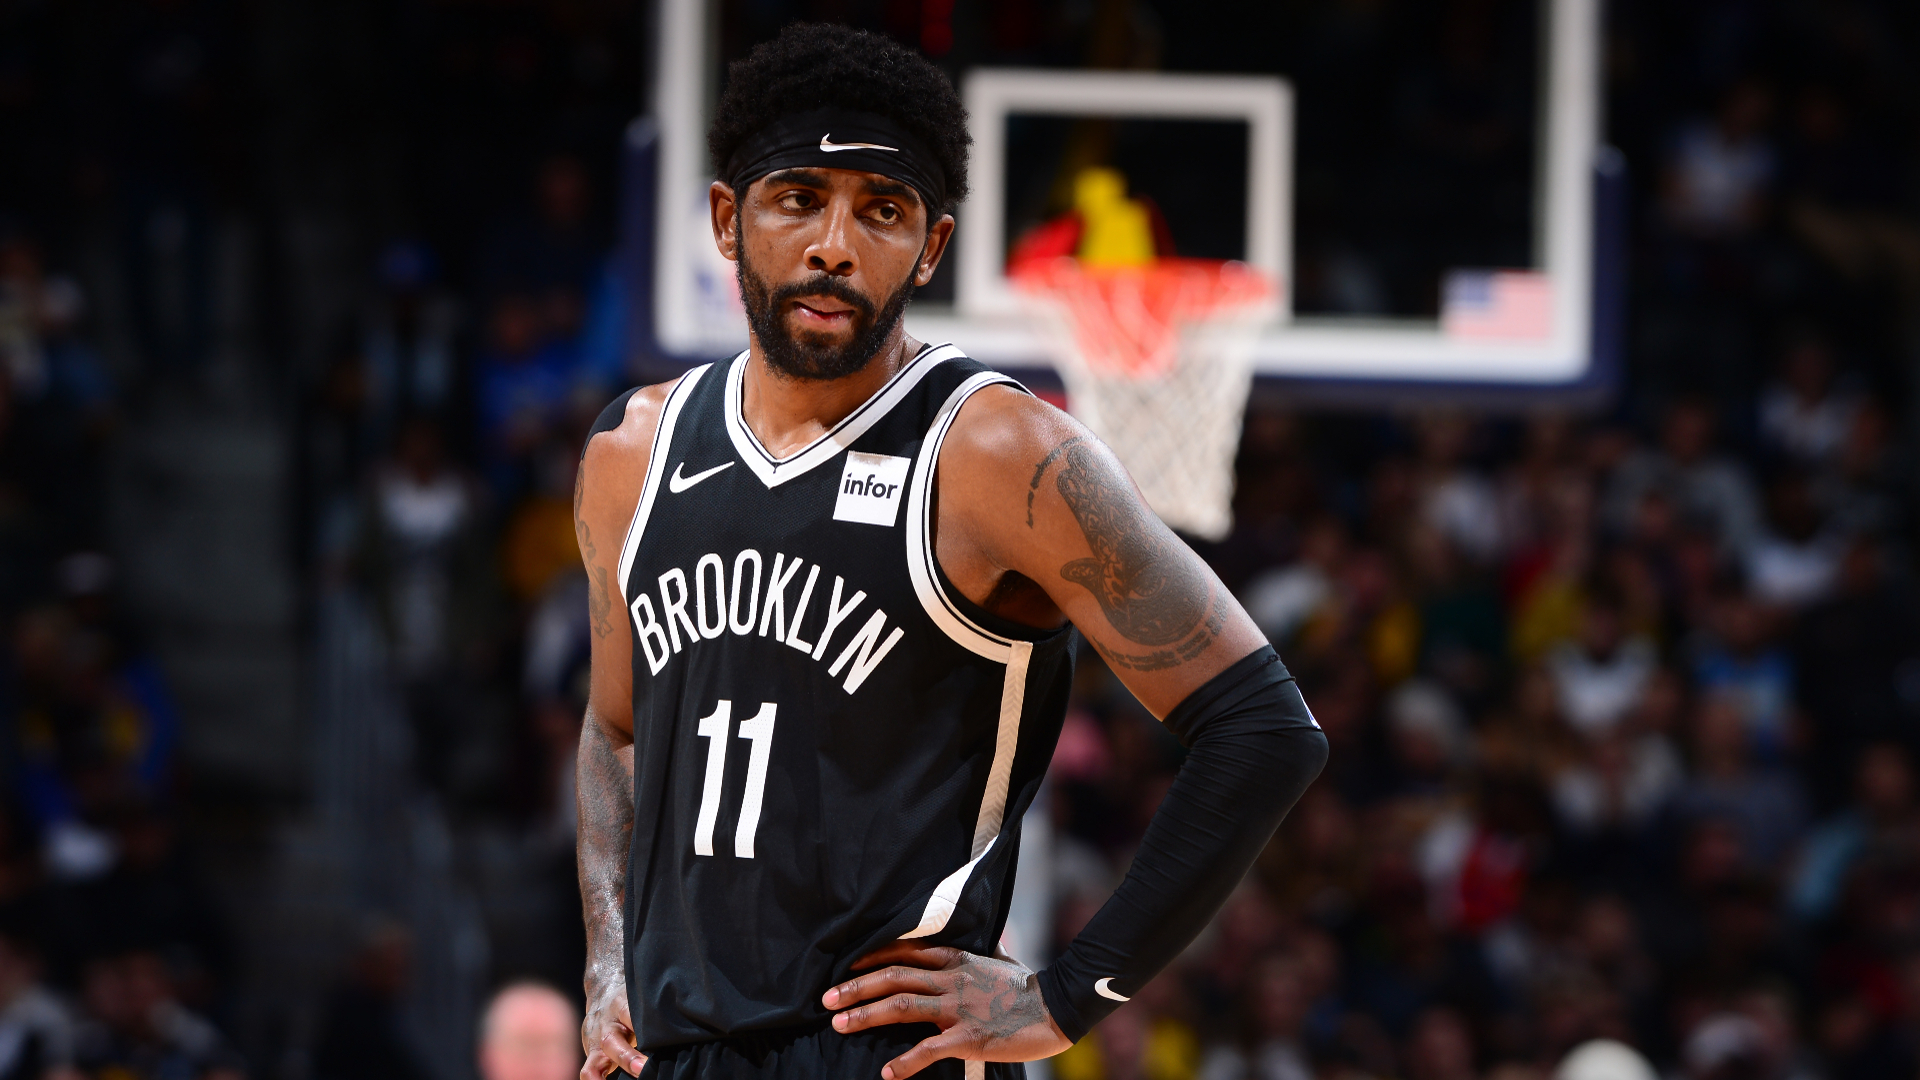 Kyrie Irving Could Miss Home Games Because of Vaccine Status